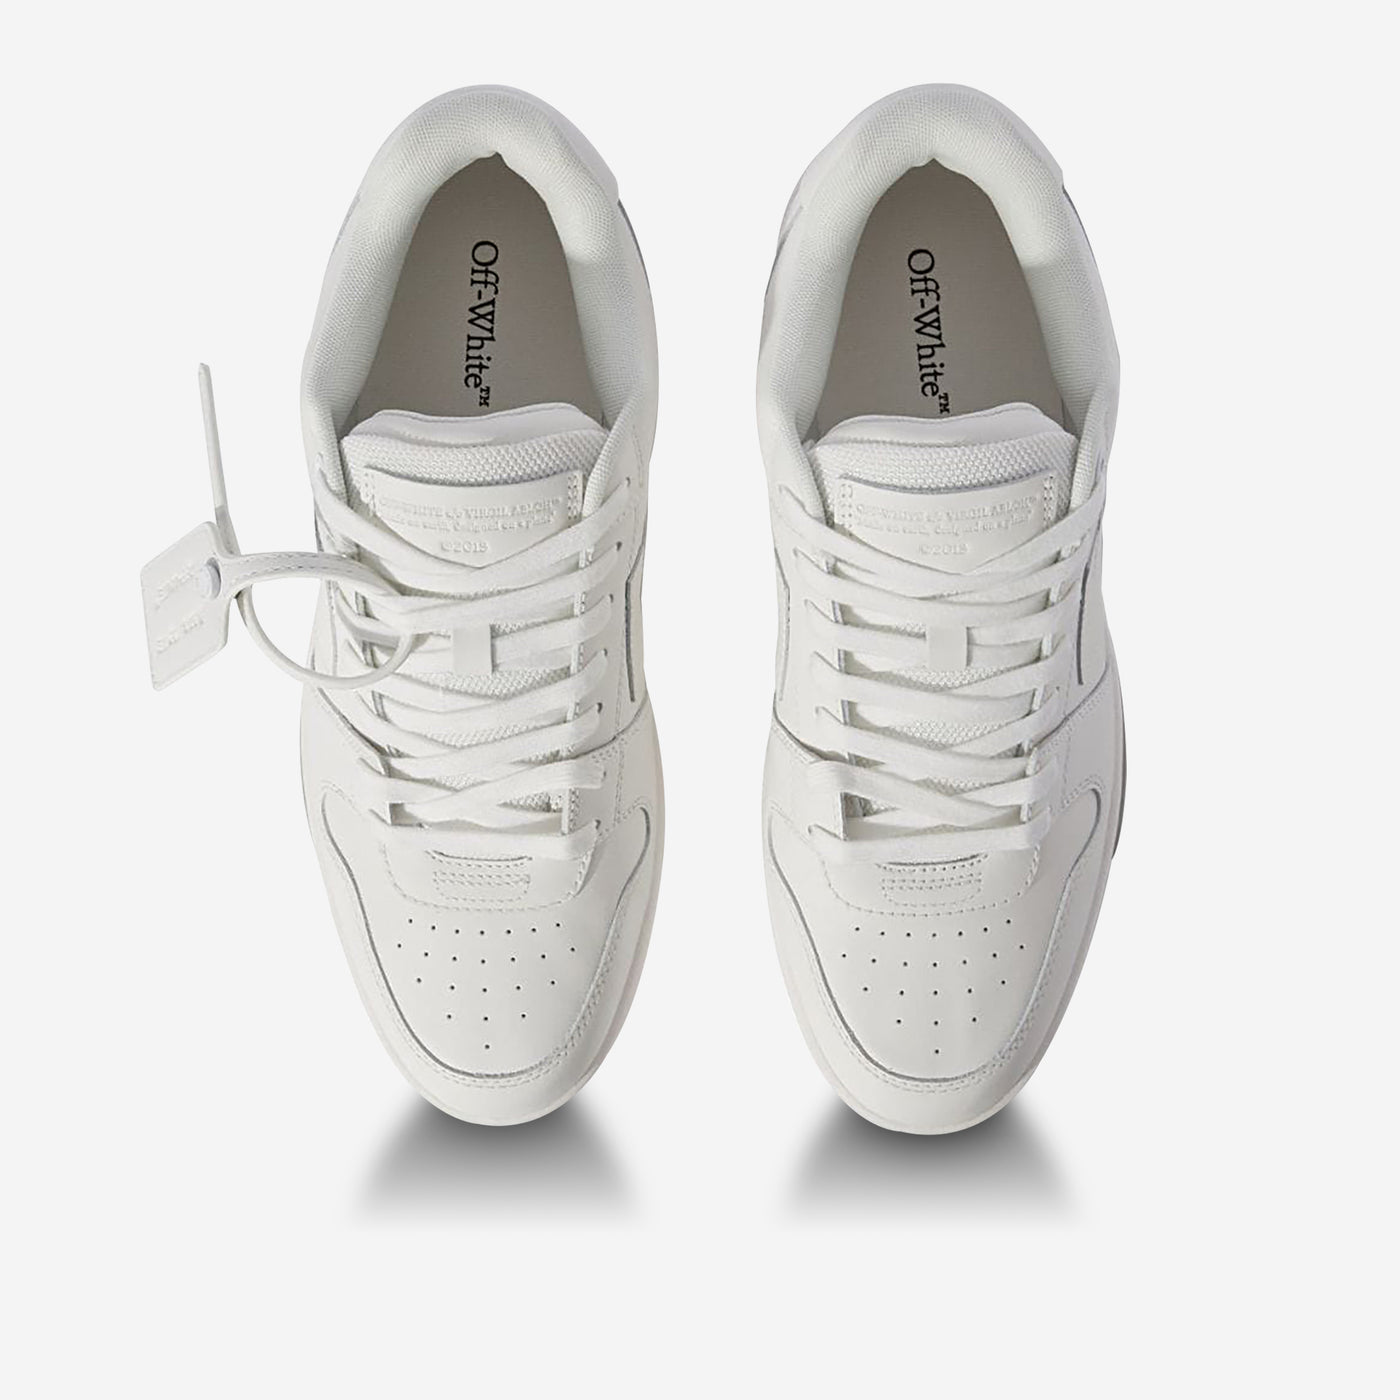 Off-White Out Of Office "Ooo" Sneakers